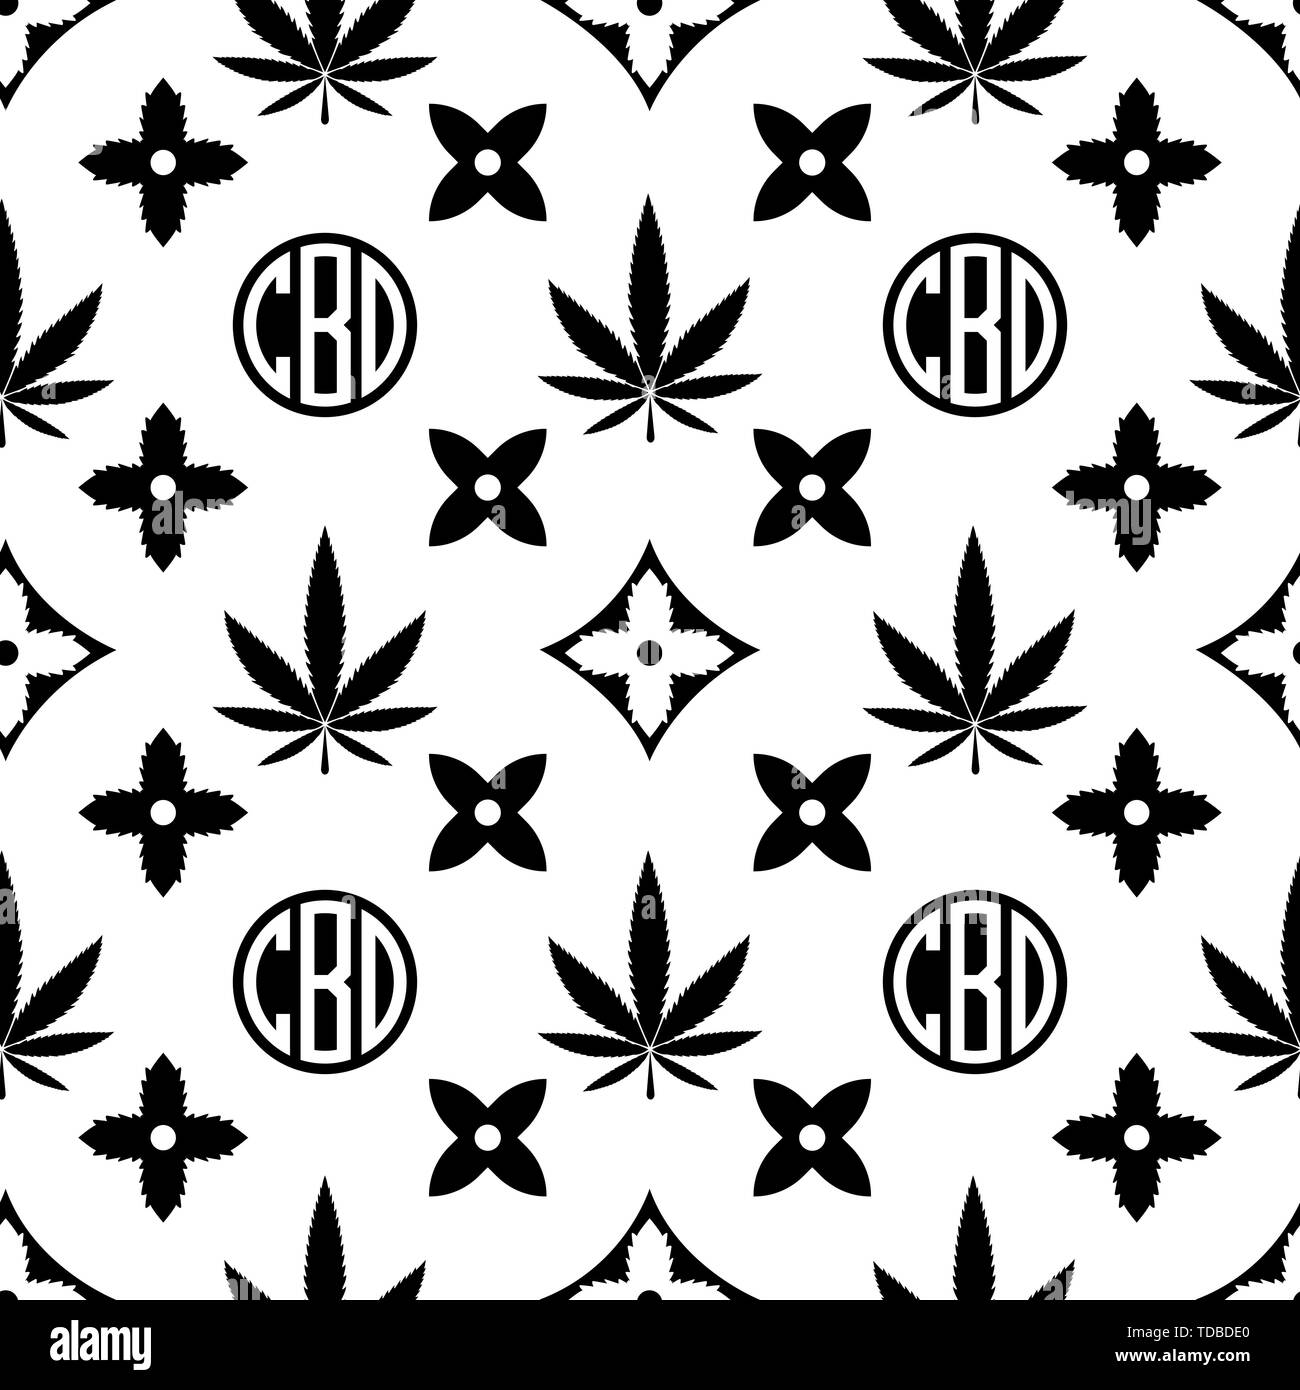 Marijuana seamless pattern black on white weed vector wallpaper cannabis leaf tile background vector illustration for web packaging wrapping stock vector image art